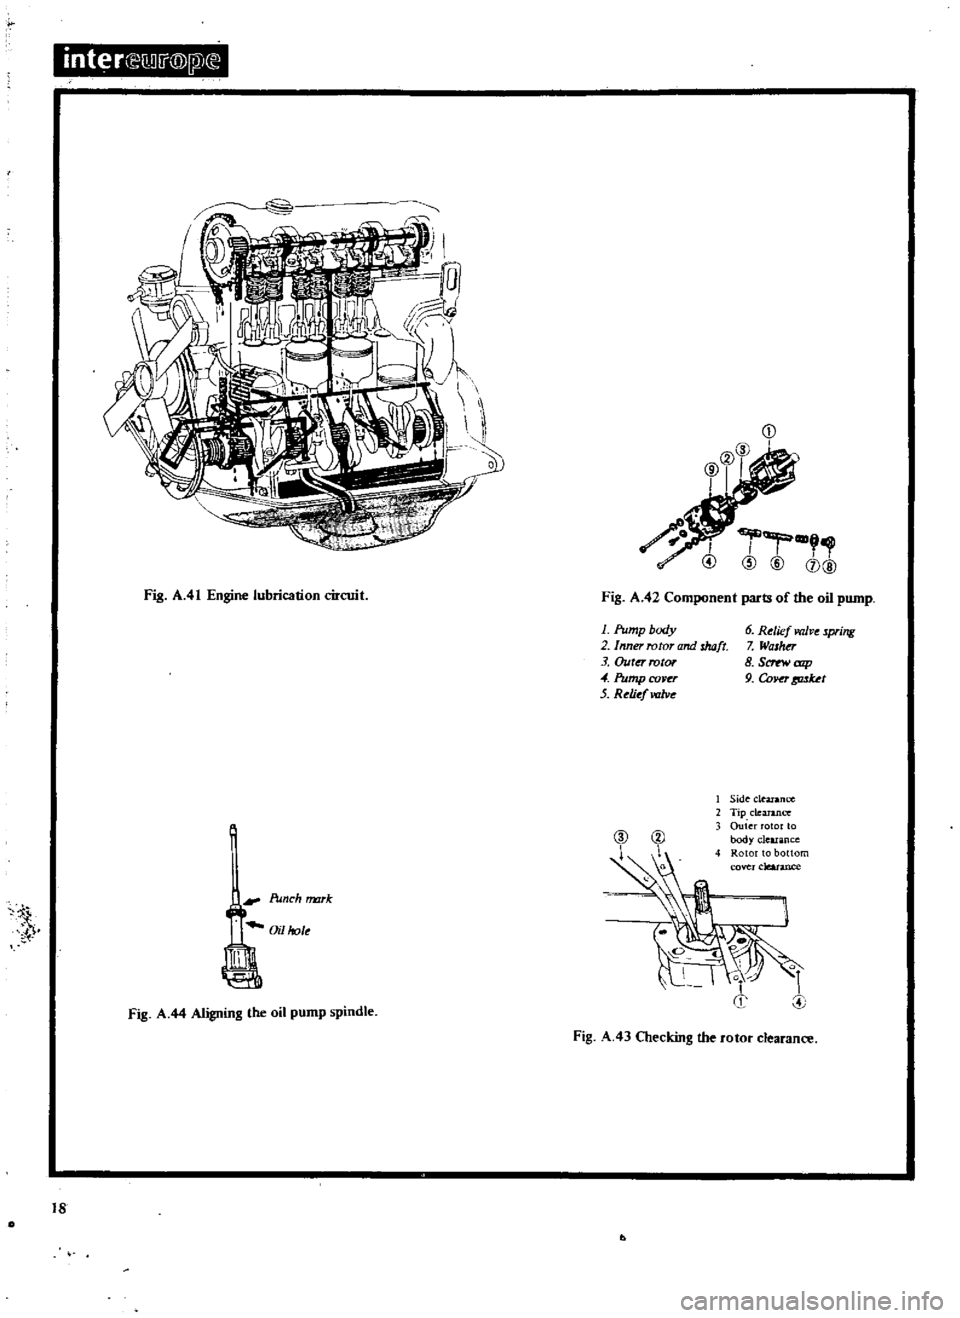 DATSUN 510 1969  Service Repair Manual 
inter 
lmi

@
jl

Fig 
A
41

Engine 
lubrication 
circuit

i 
Punch 
rmrk

Oil 
hole

L

Fig 
A 
44

Aligning 
the 
oil

pump 
spindle

18 
II

l

o 
CD

I

Fig 
A
42

Component 
parts 
of 
the 
oil
